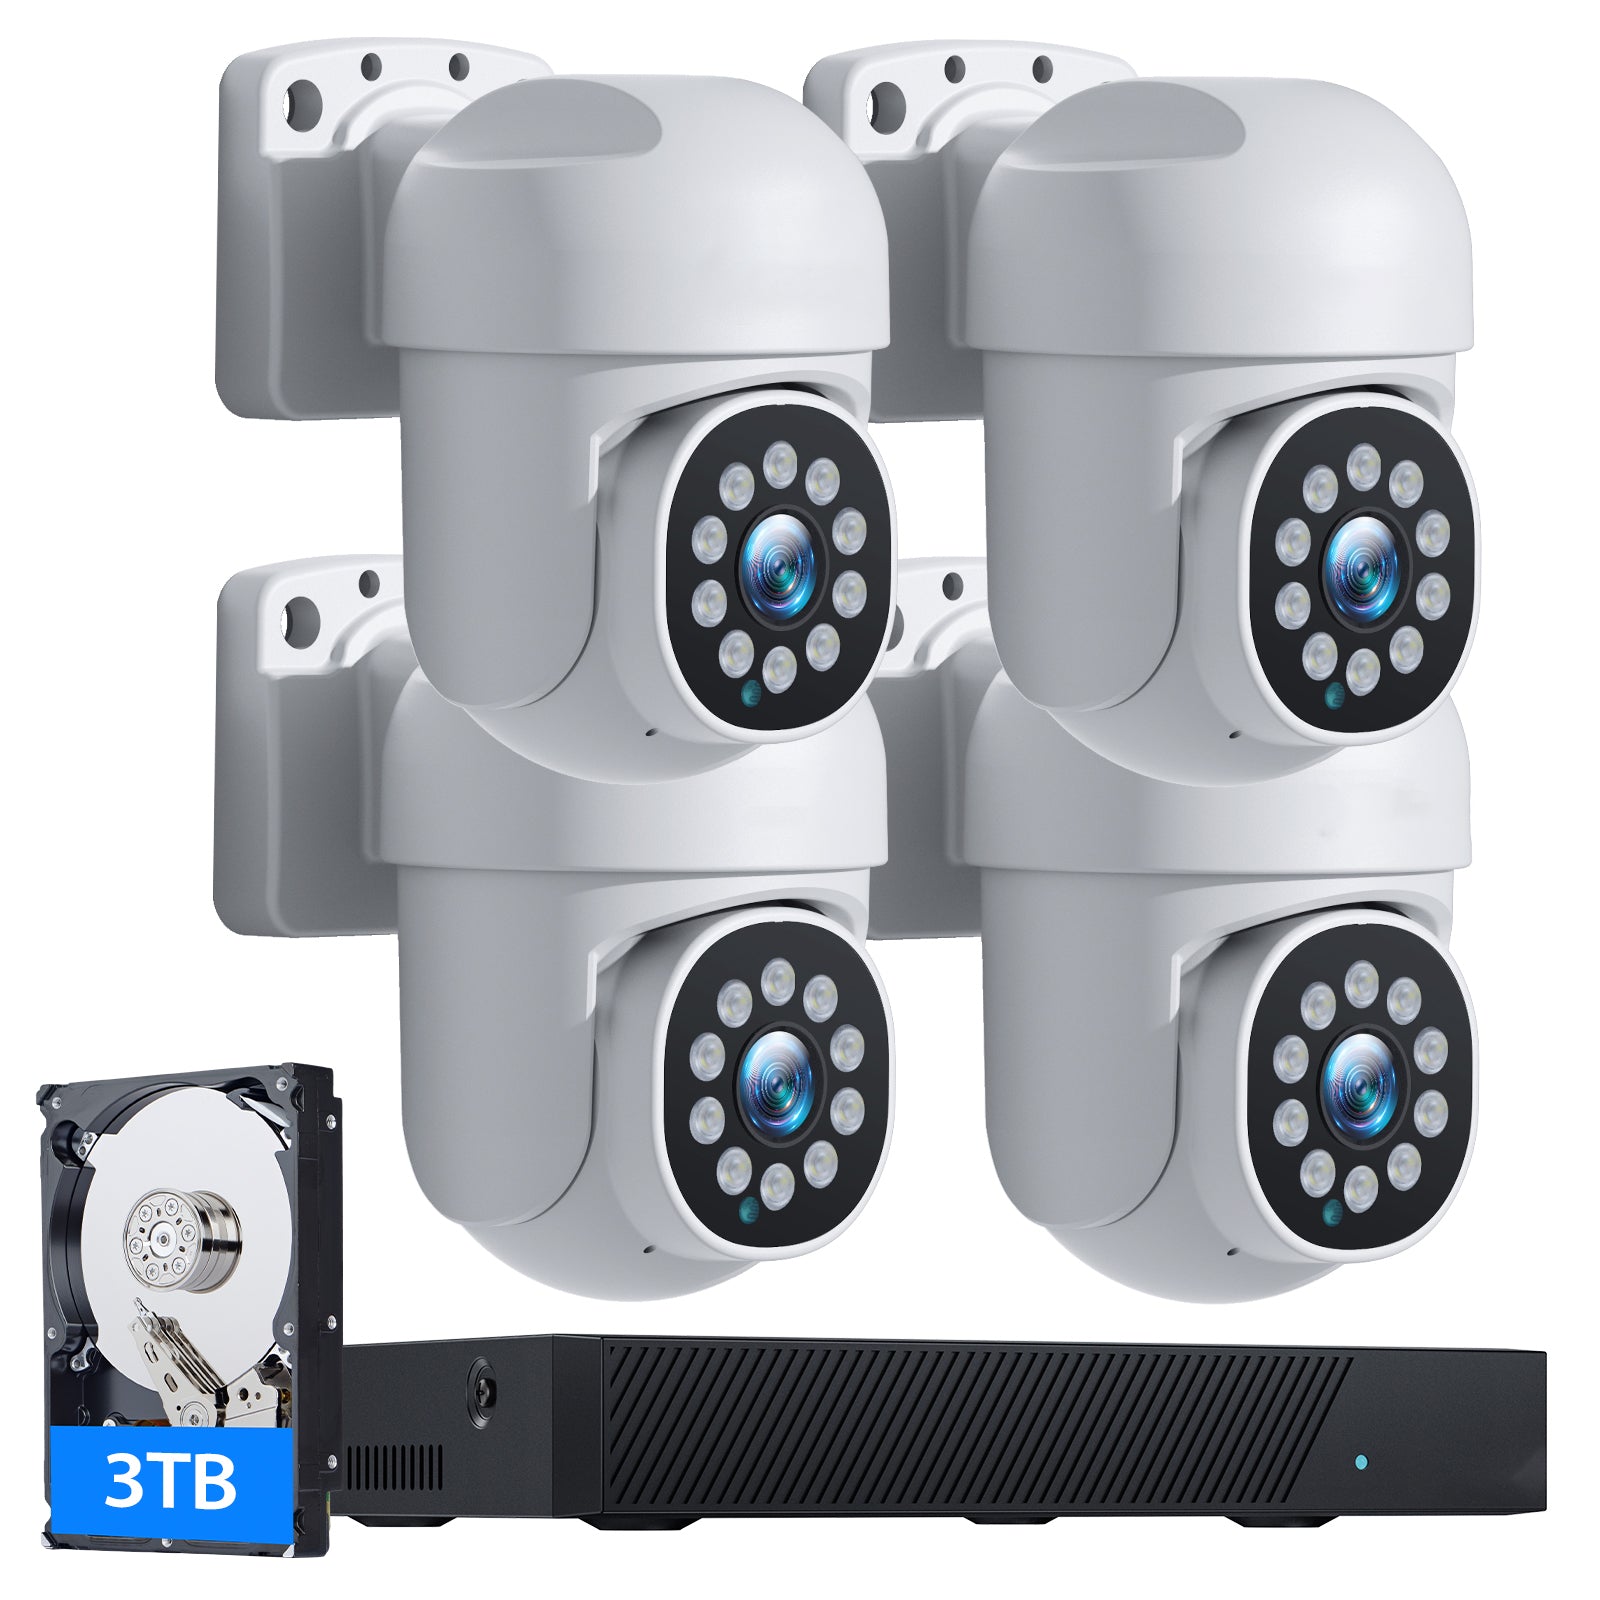 4K 5MP Security Camera System PTZ Home CCTV Camera with 8CH NVR and Motion Tracking, Color Night Vision